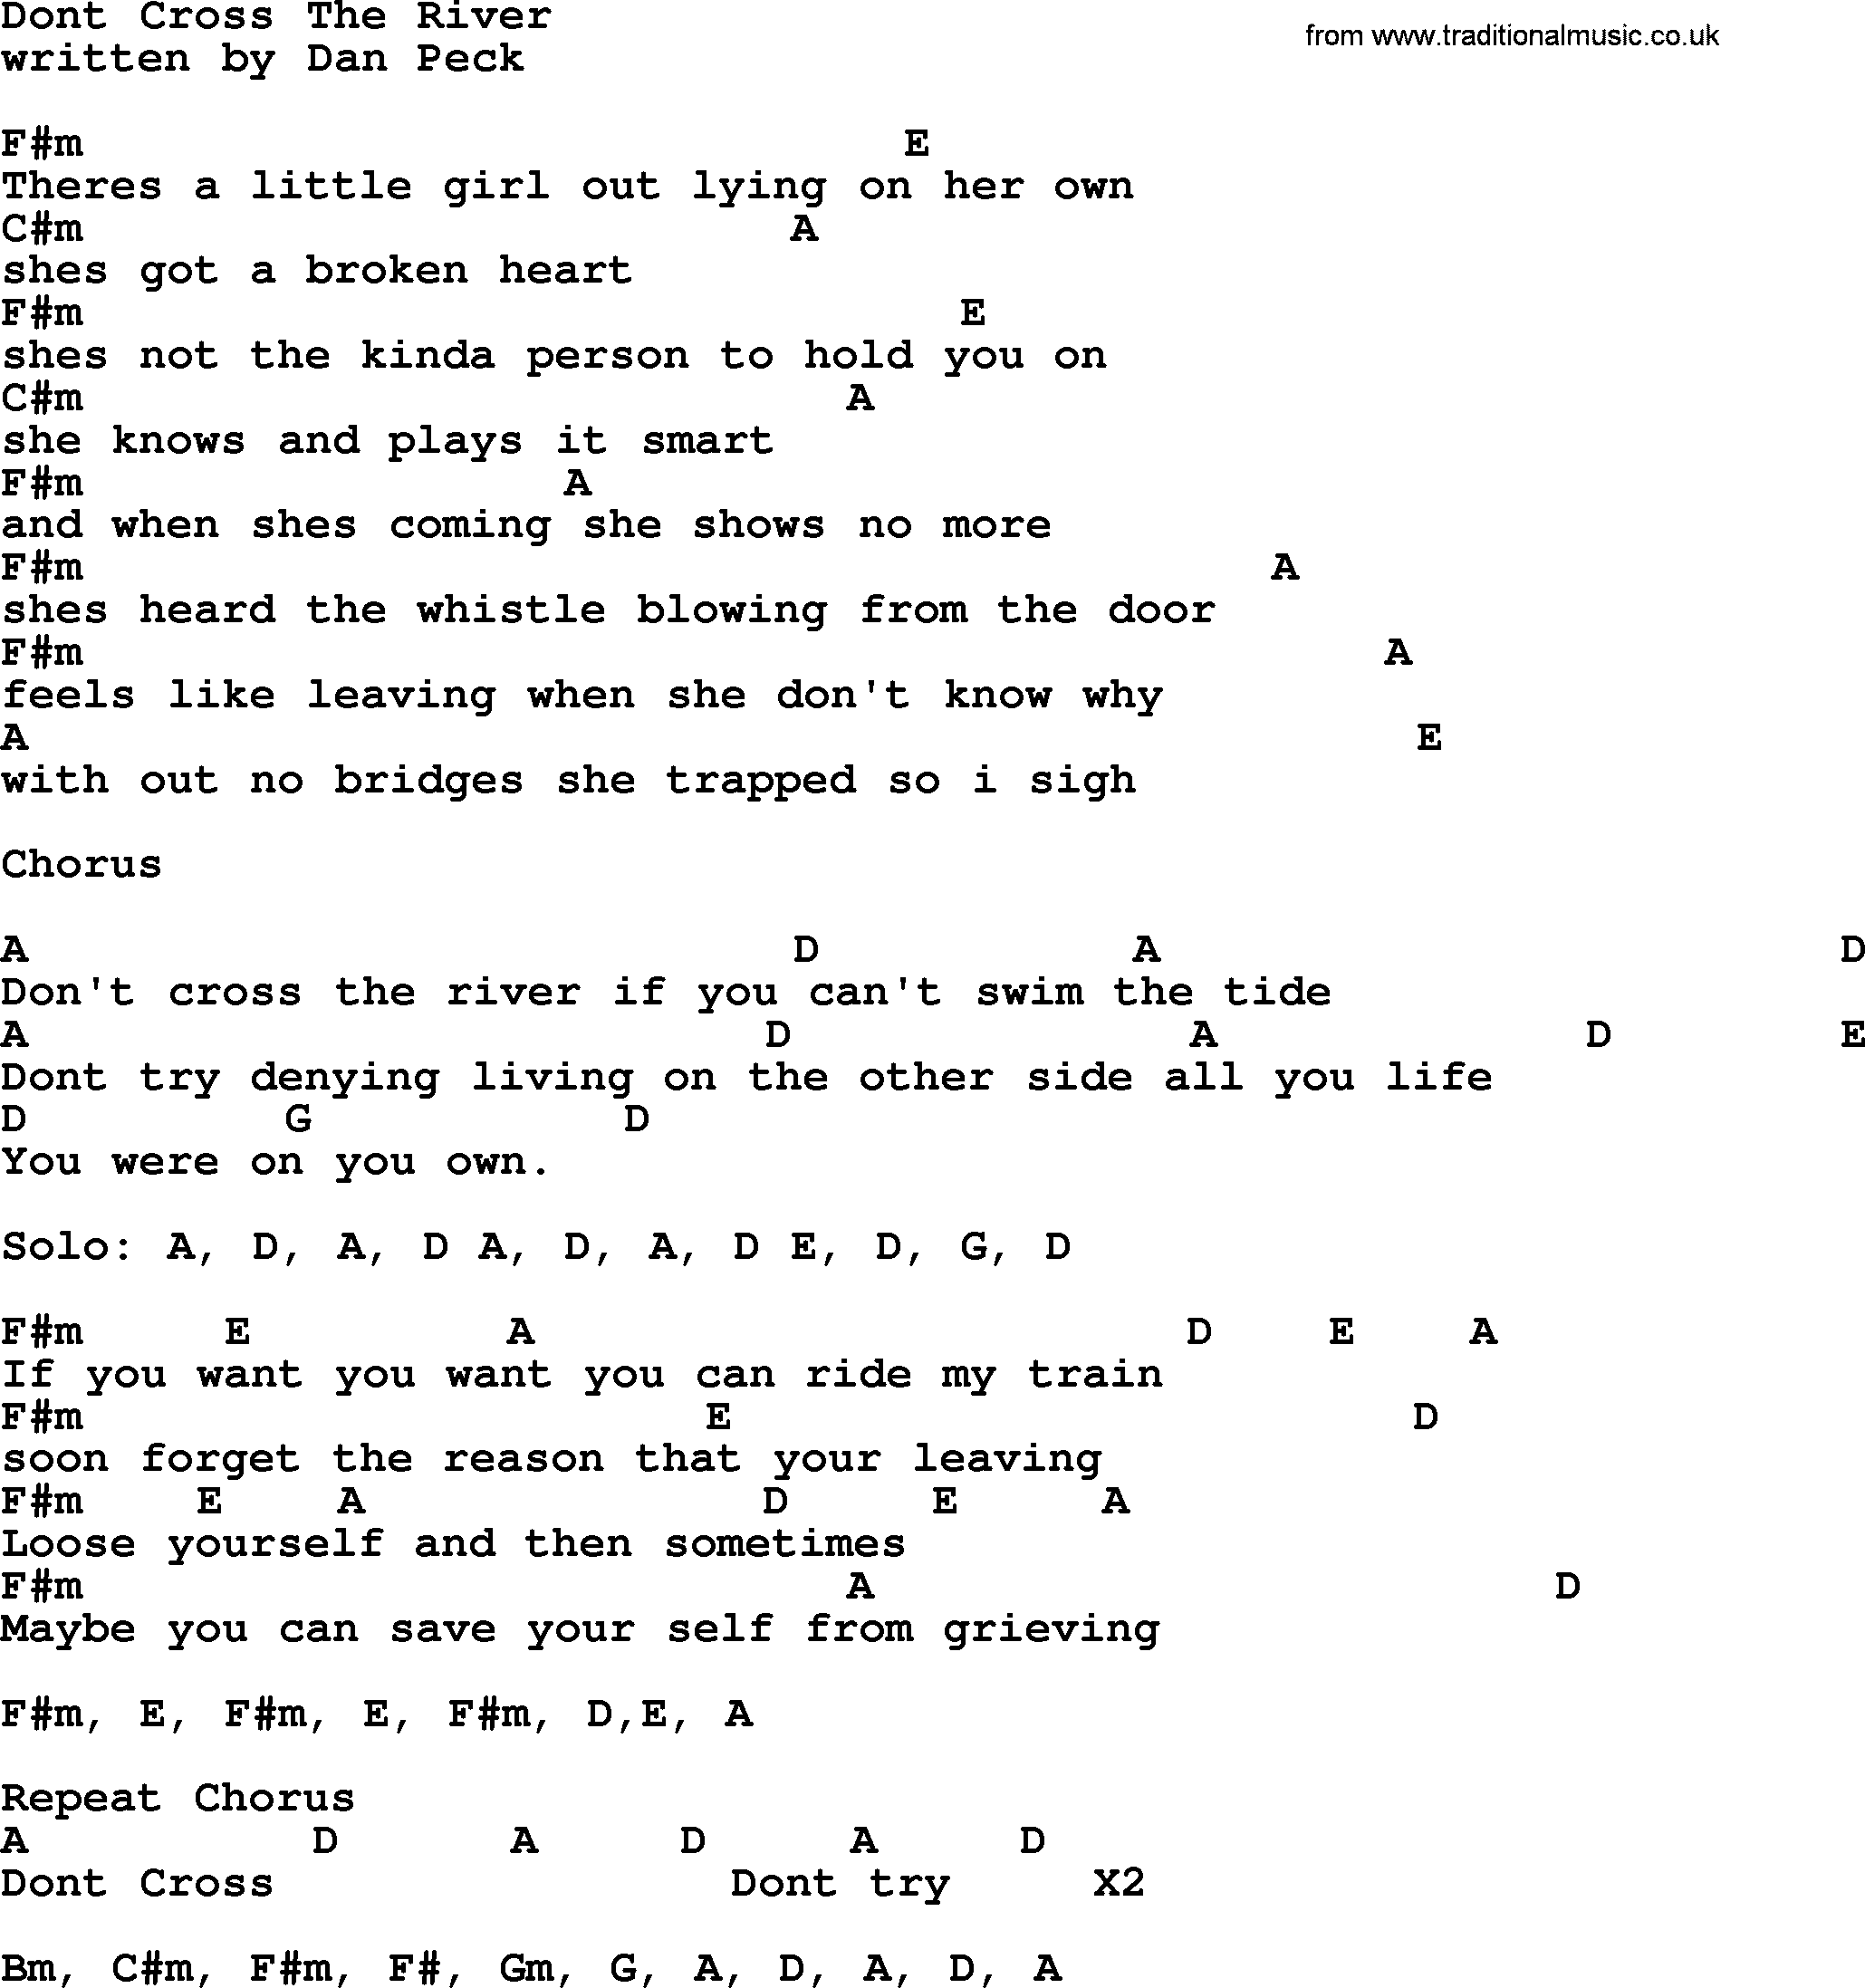 Garth Brooks song: Dont Cross The River, lyrics and chords